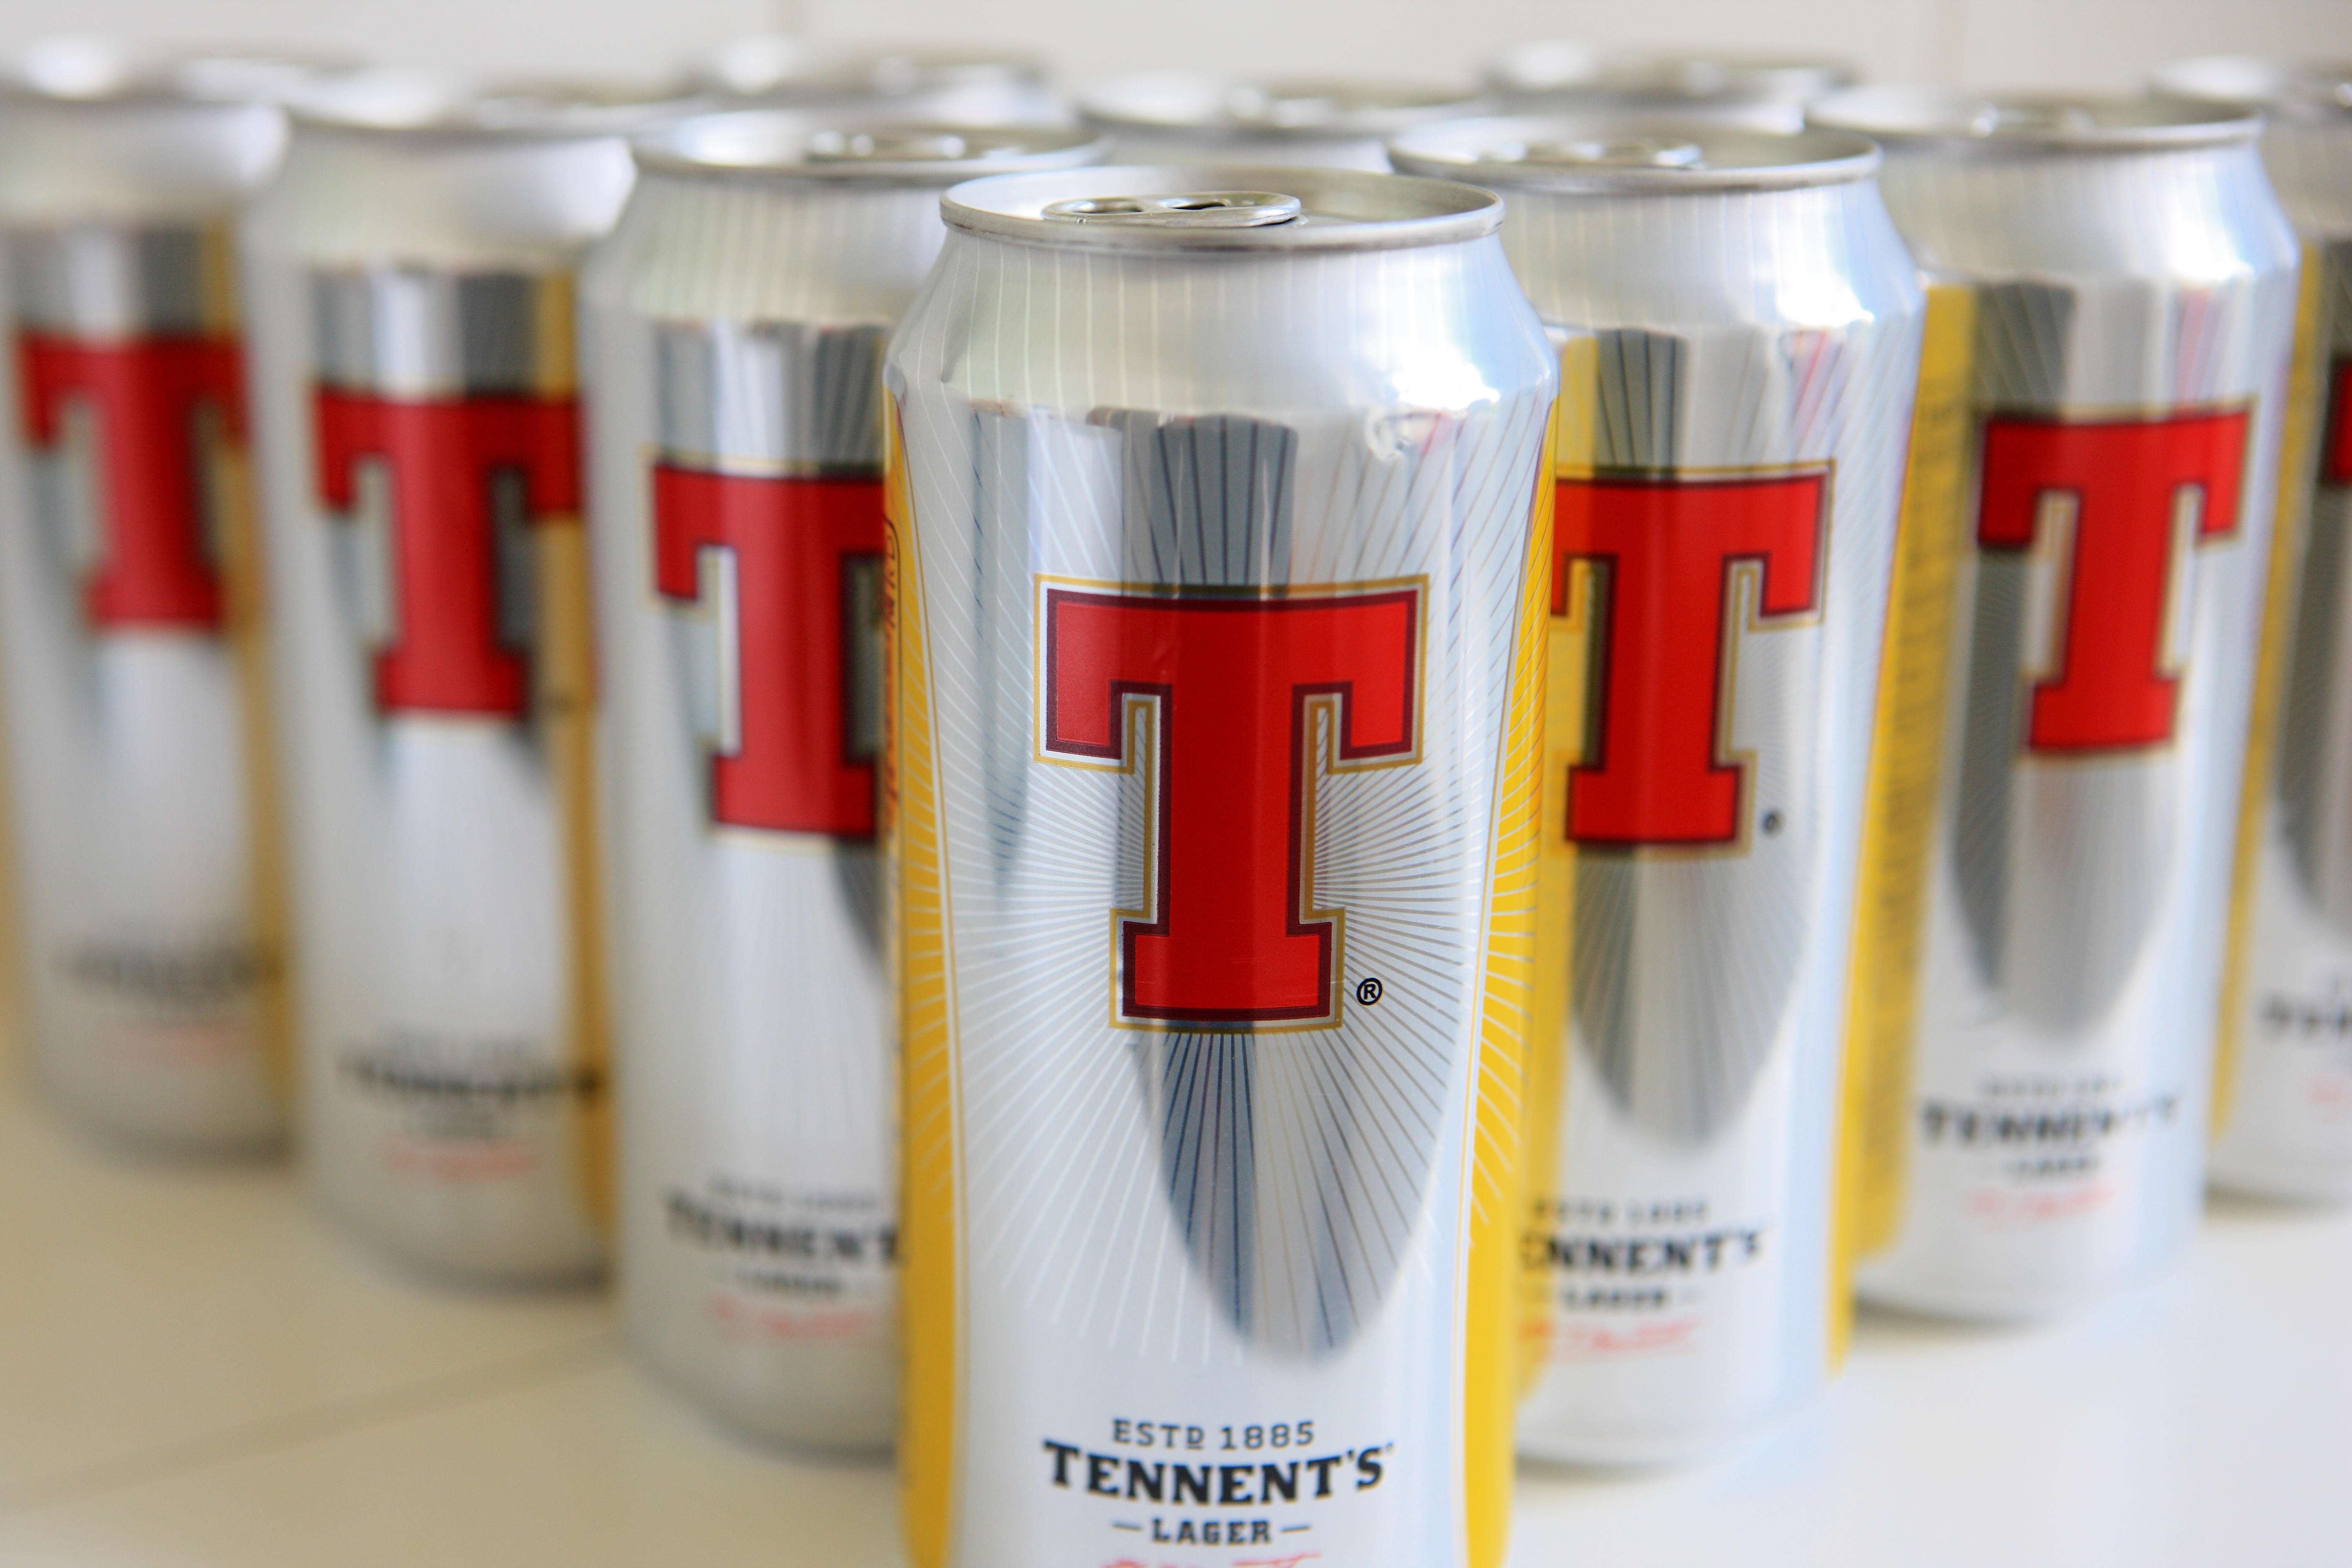 Four beers from Scotland’s biggest brewery, though not its bestselling Tennent’s Lager, to join crowded Chinese market, where it could give Stella Artois some competition, one expert says